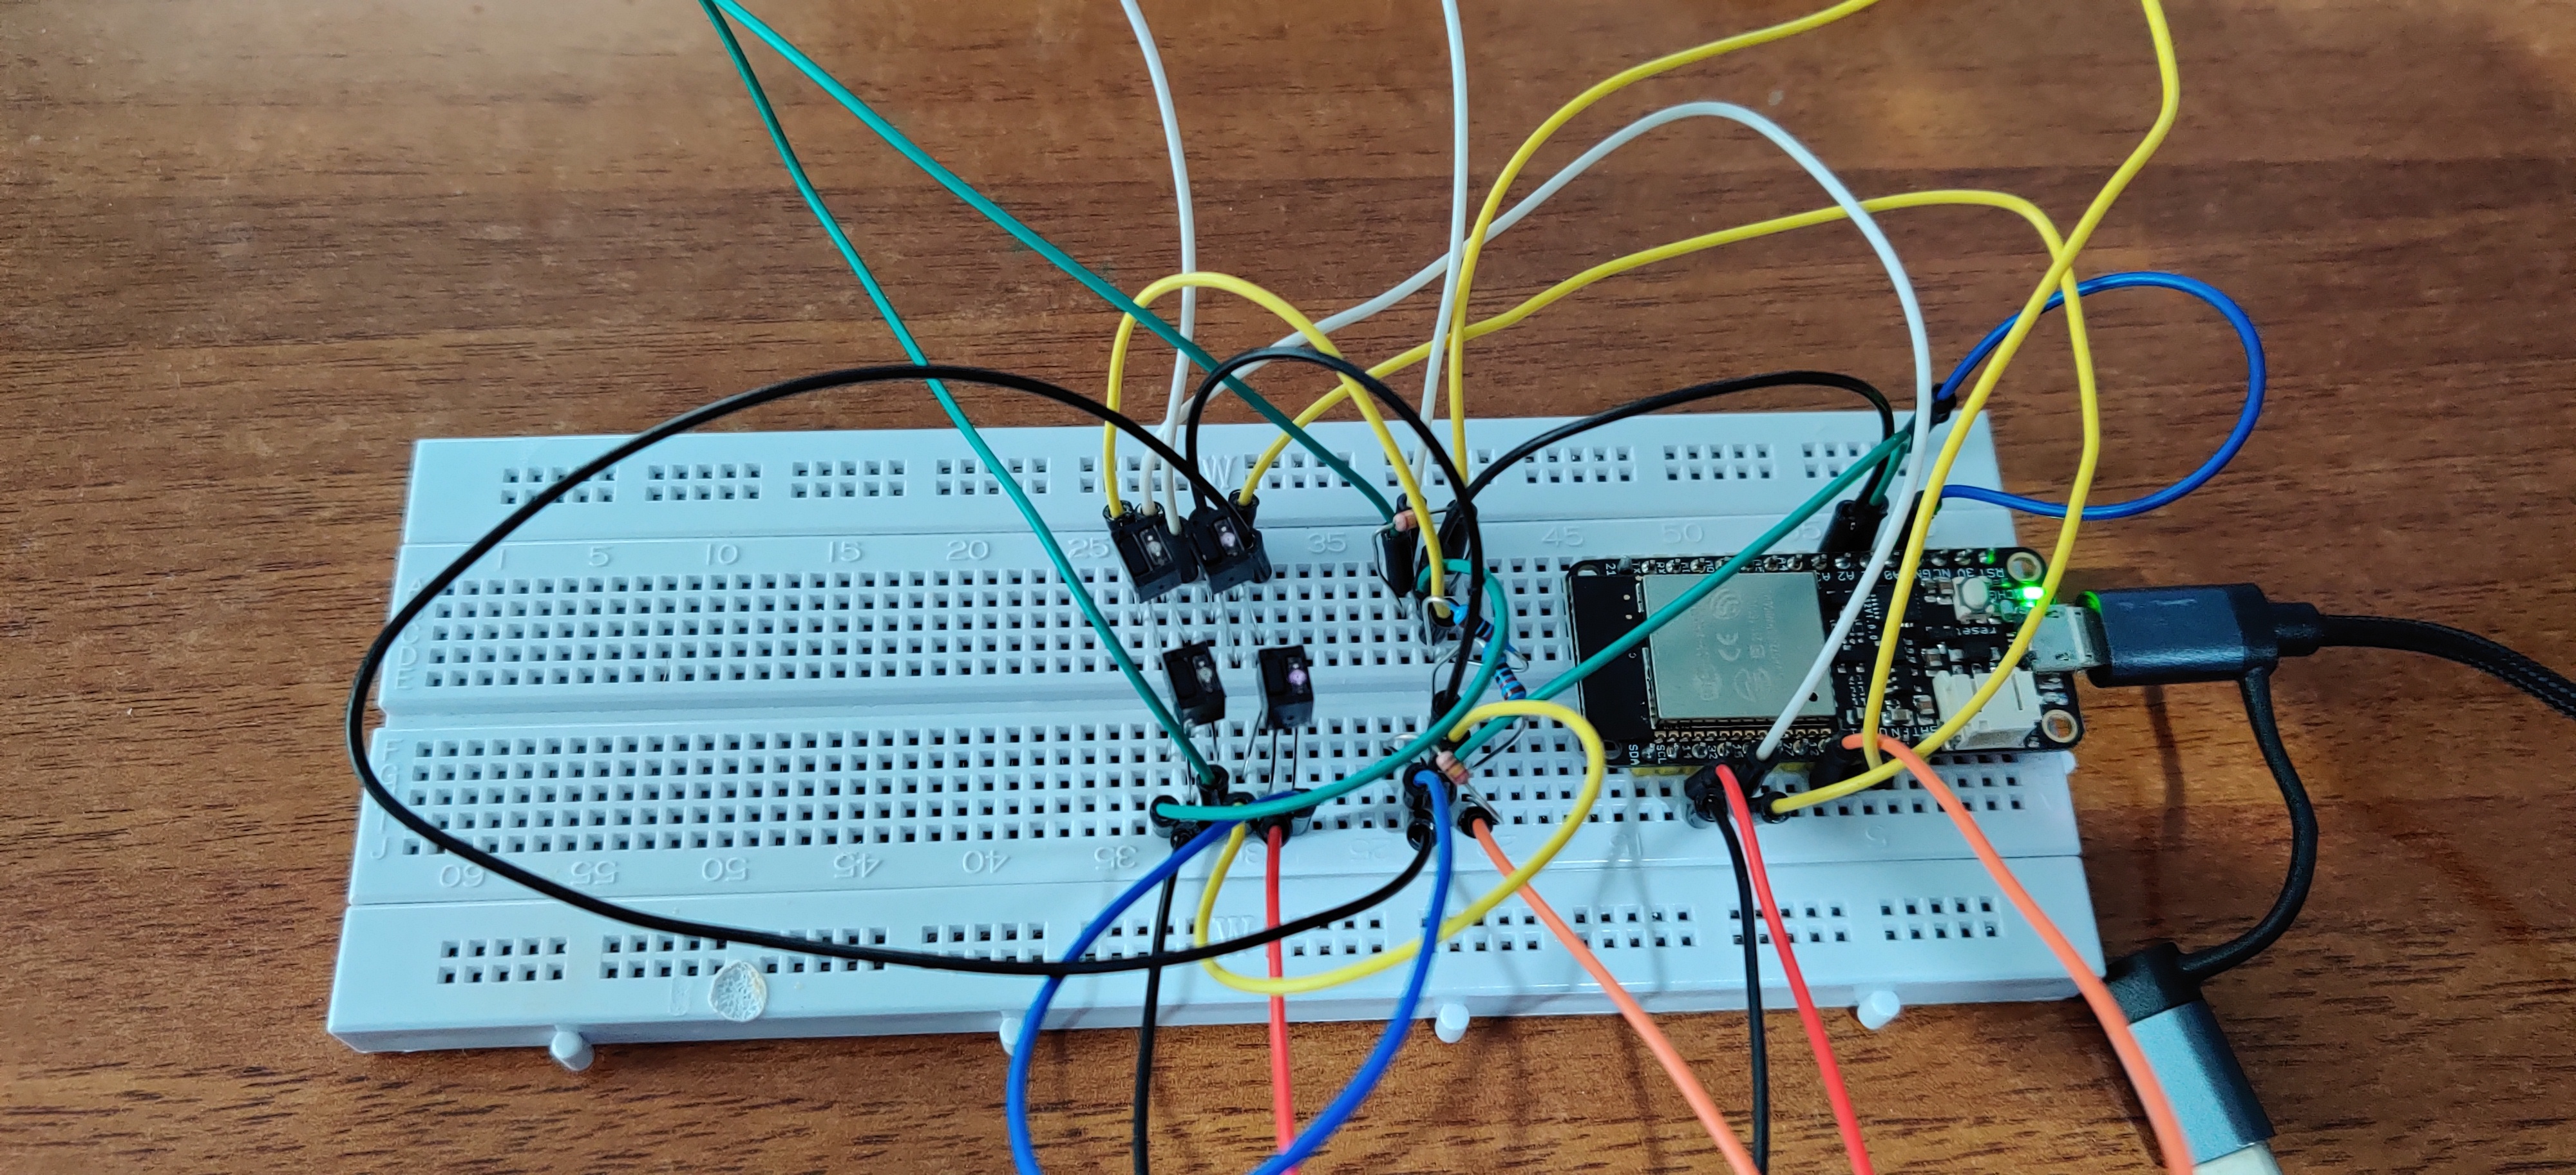 breadboard with a ESP32 dev board, 4 QRD1114 sensors, four
resistors, and a bunch of wires. One QRD1114's LED is shining
a weak pink, the others are off